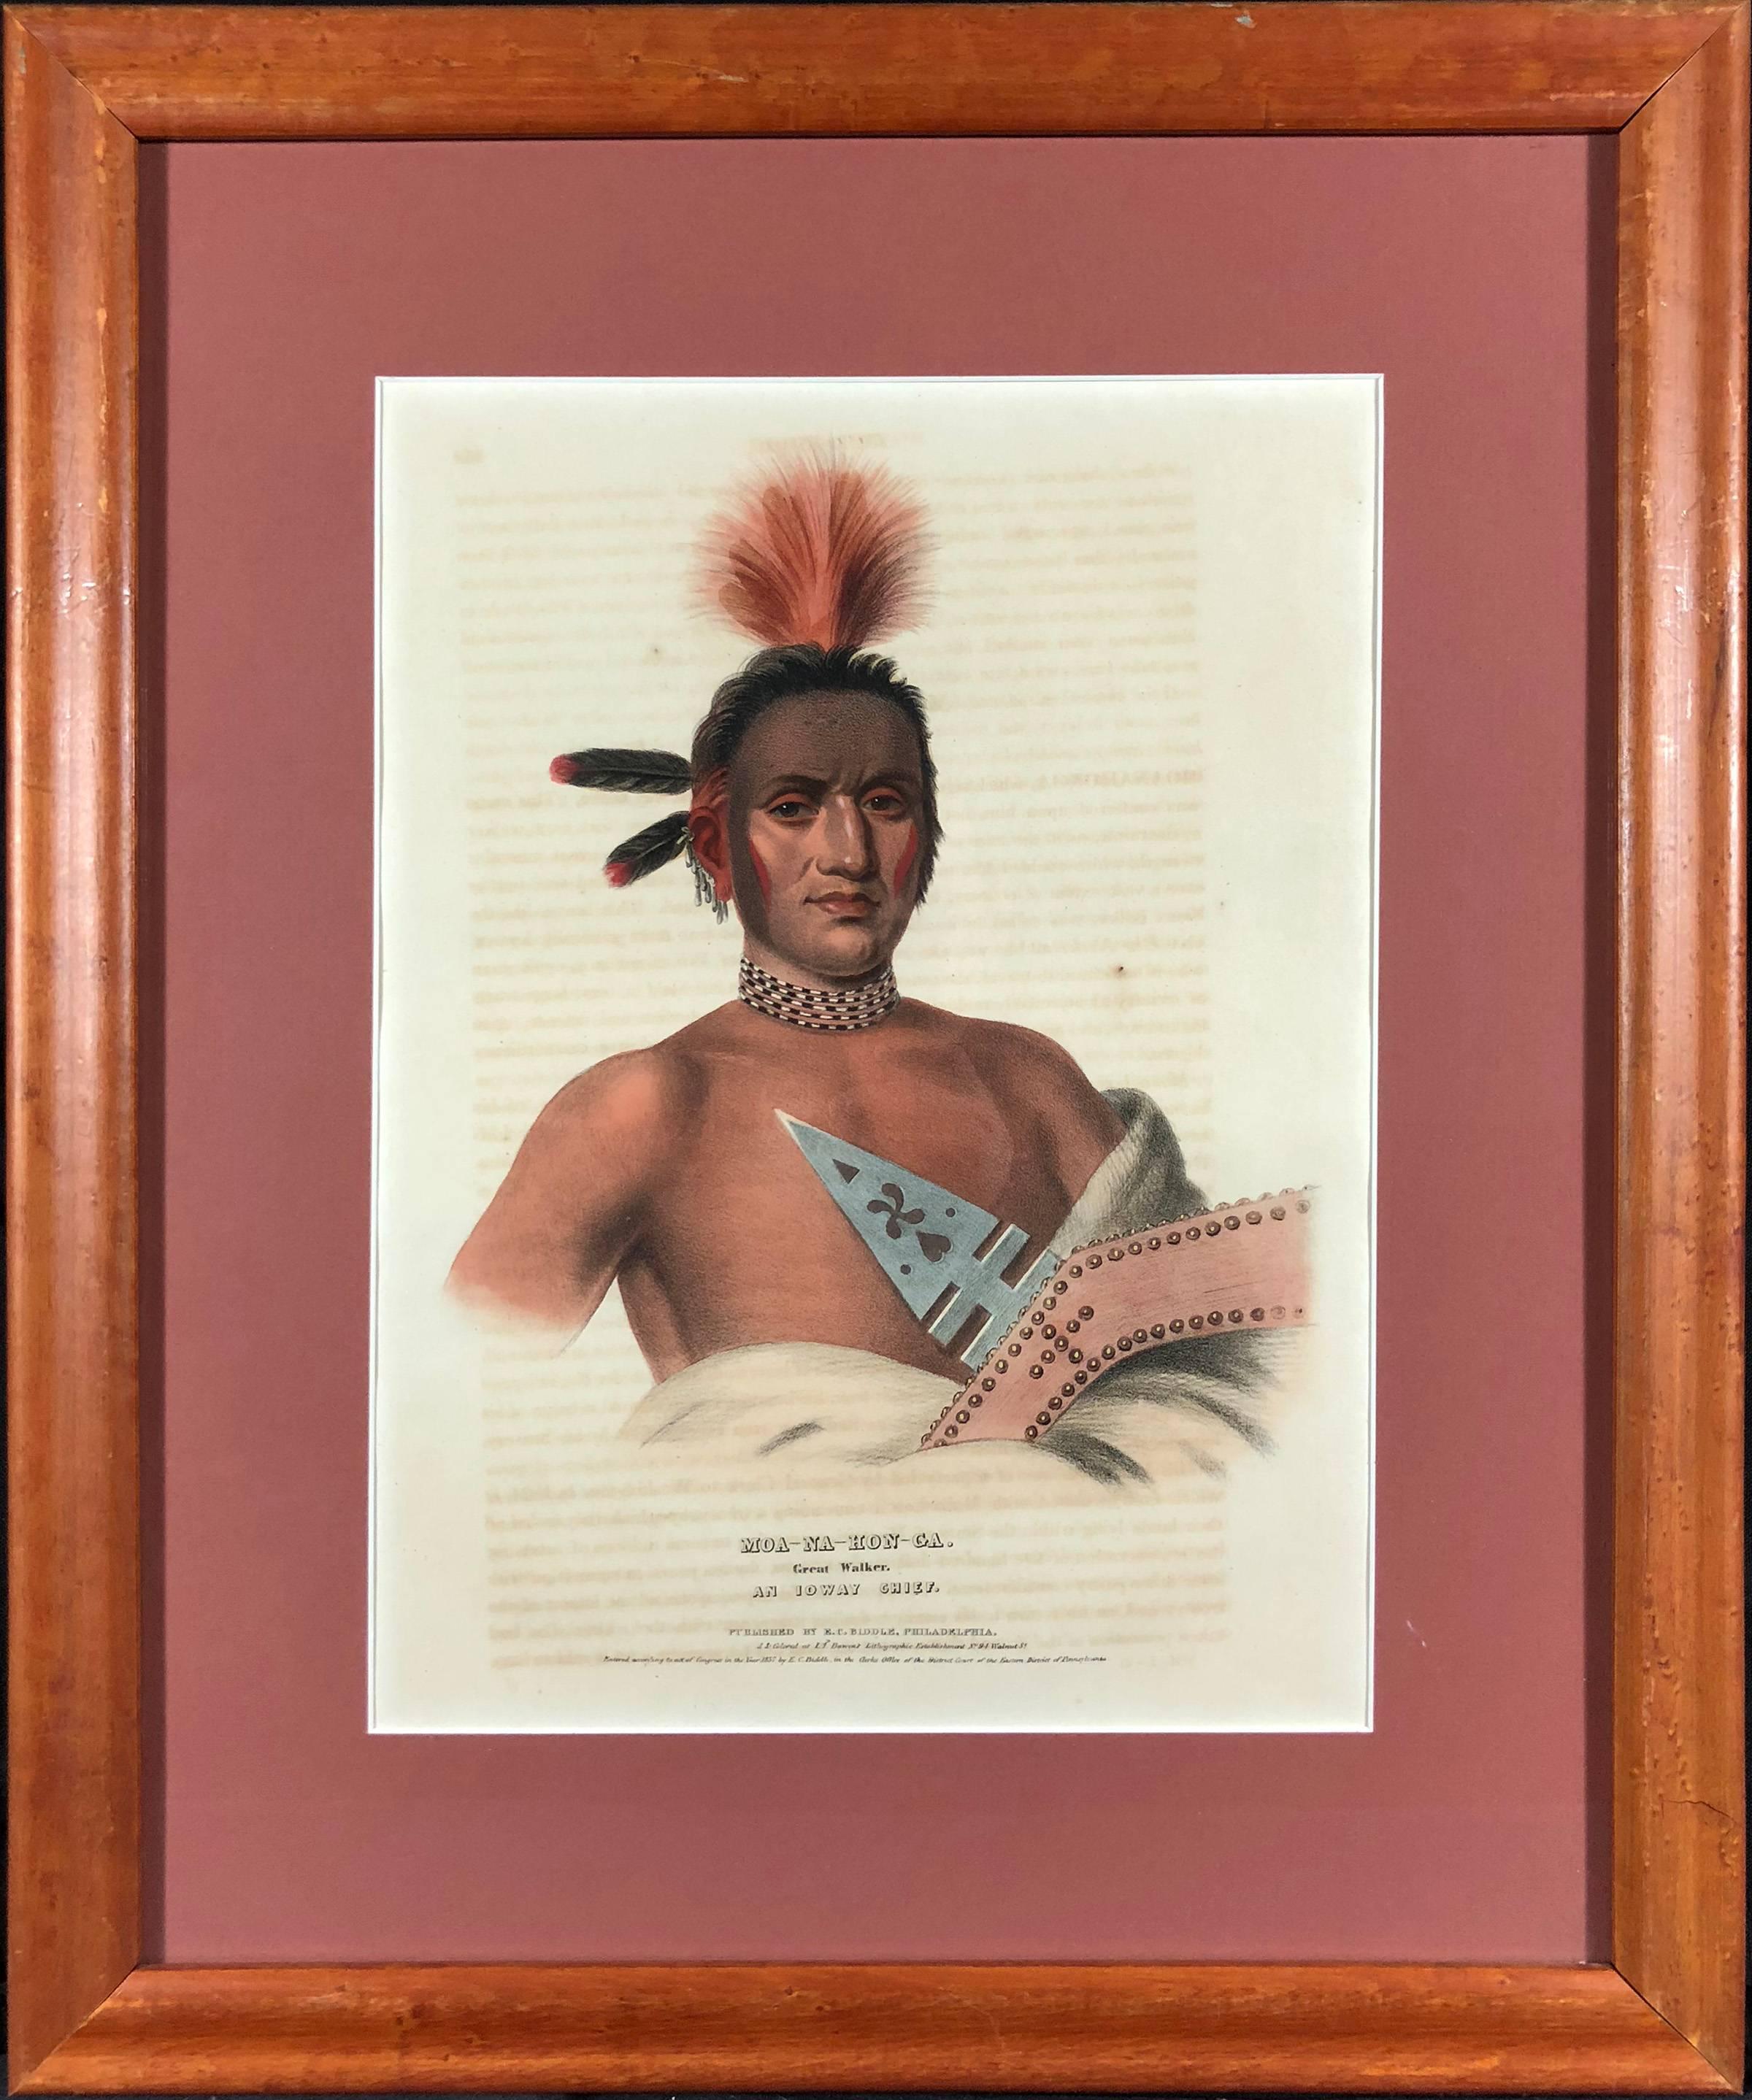 Moa-Na-Hon-Ga, Great Walker, An Ioway Chief - Print by McKenney & Hall